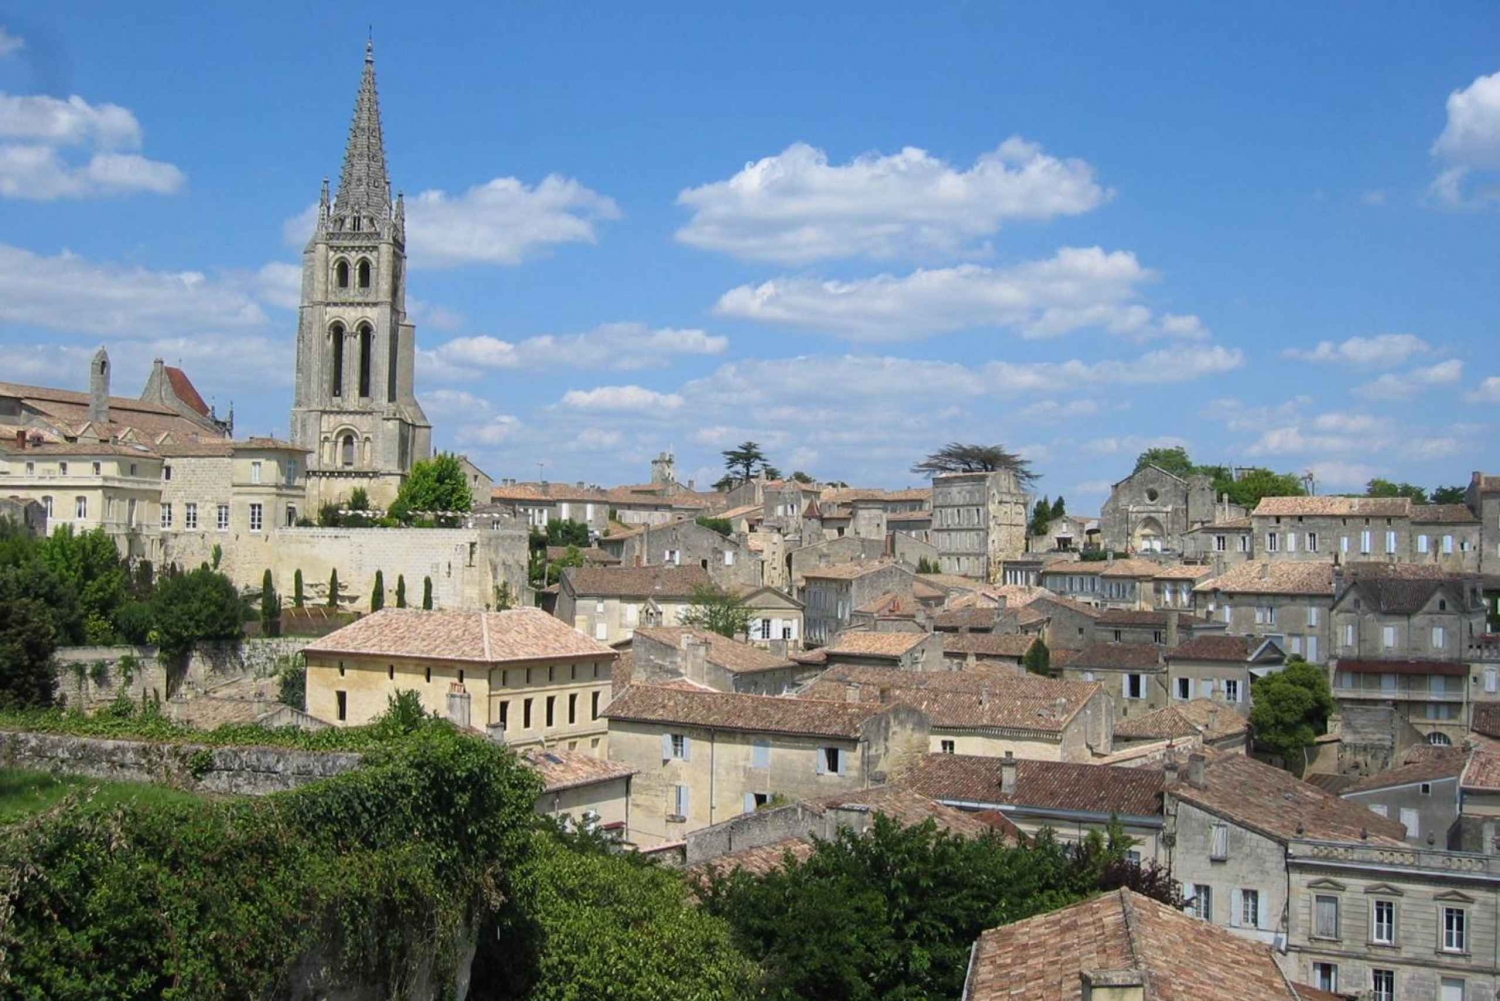 From Bordeaux: Saint-Emilion Day Trip with Lunch and Wine